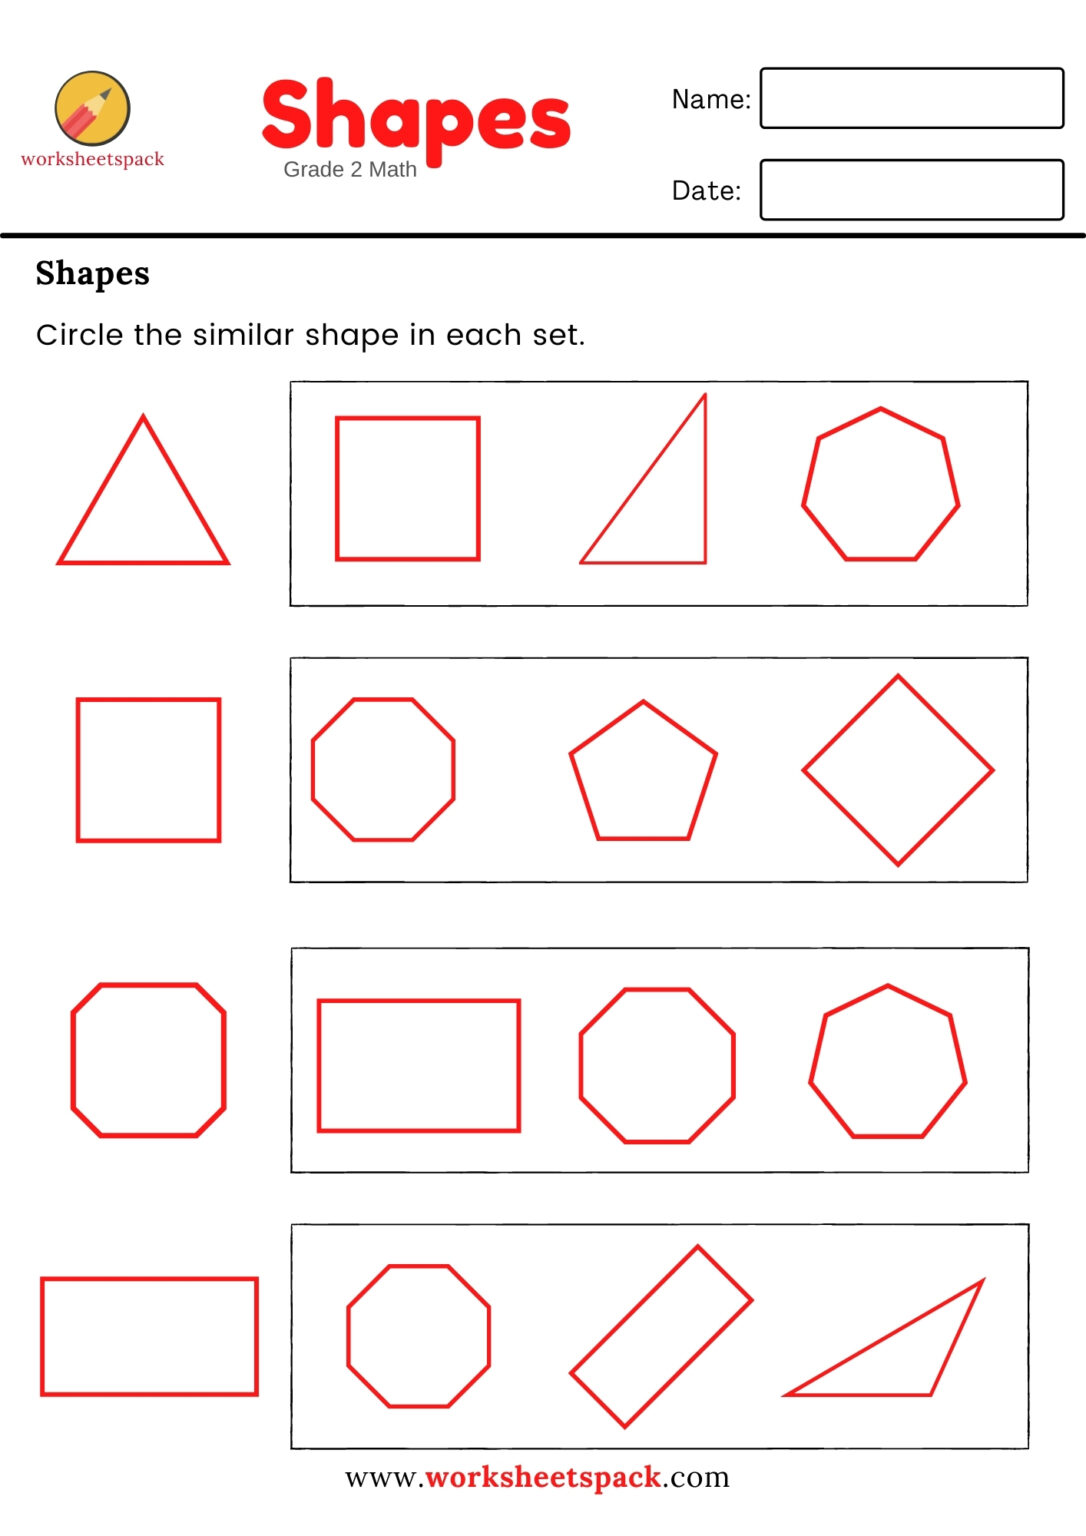 nd grade math worksheets shapes and vertices nd grade math worksheets - 3d shapes faces edges and vertices | 2nd grade math worksheets shapes and vertices